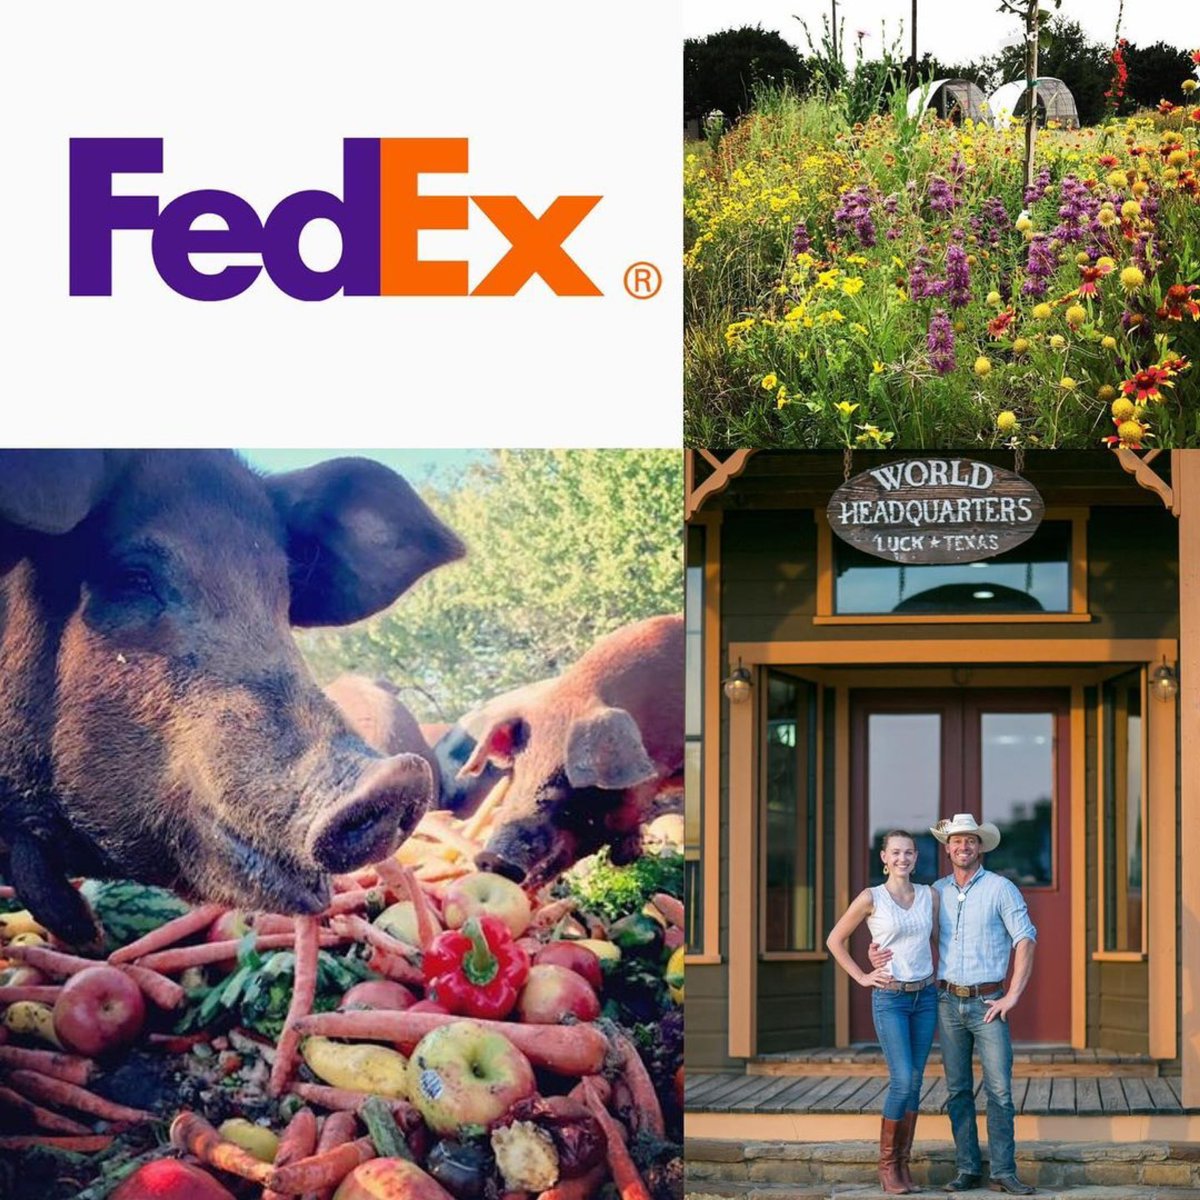 Help TerraPurezza win the FedEx Small Business Grant Contest with your vote! Voting period starts today & goes through March 24th. Limited to one vote per email address every 24 hours. Please vote every day!! Thank you for your ongoing support. #LuckTexas
smallbusinessgrant.fedex.com/entry/FsLFapJL…